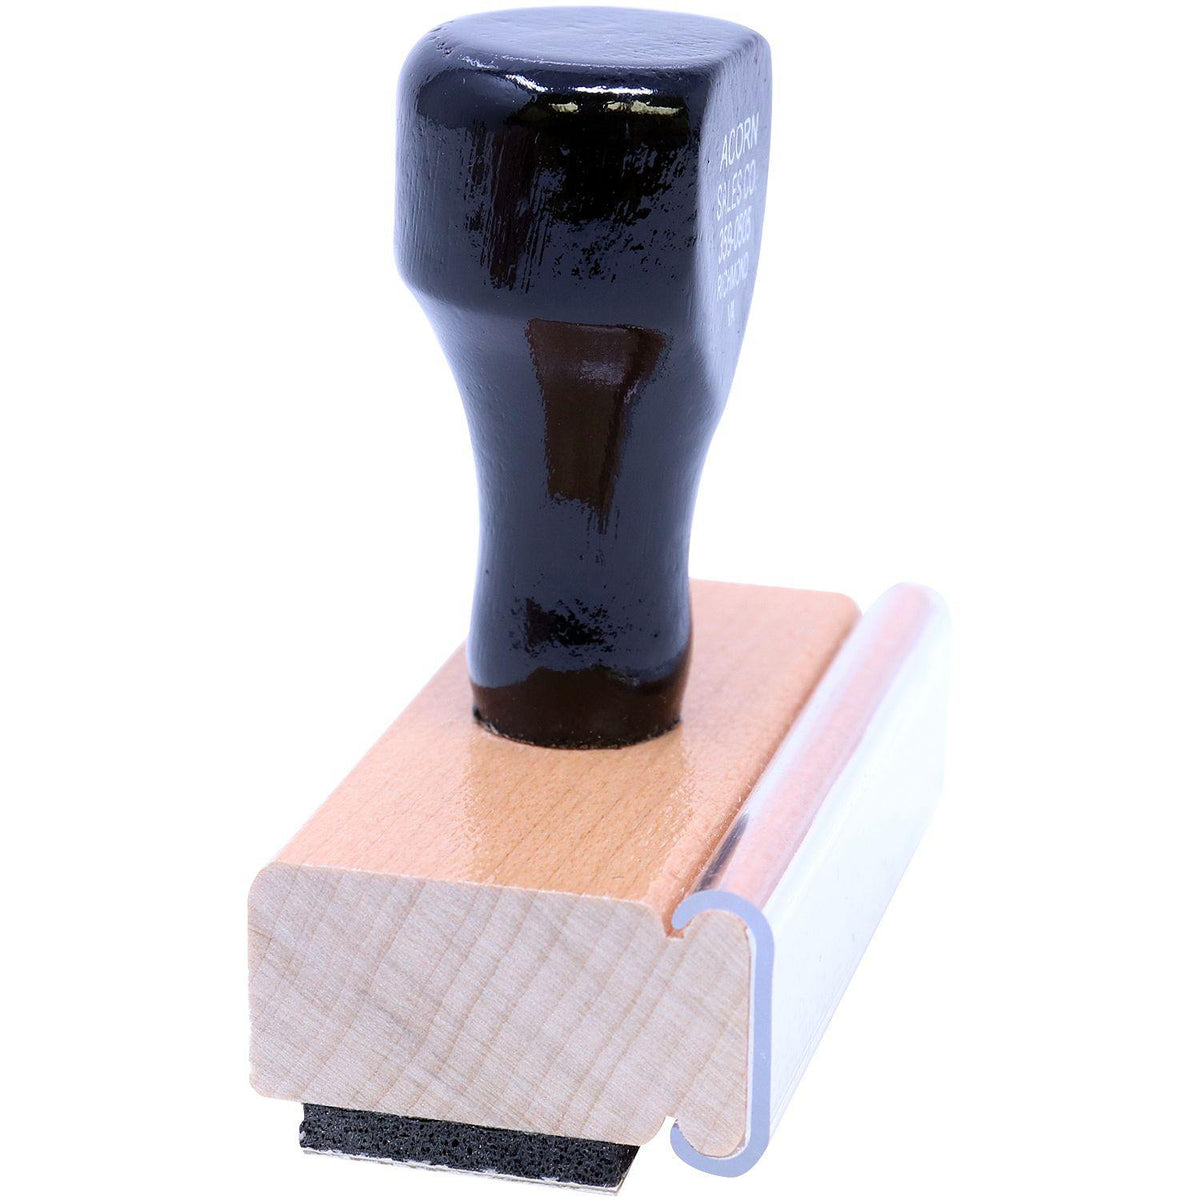 Side View of Large Application Incomplete Rubber Stamp at an Angle